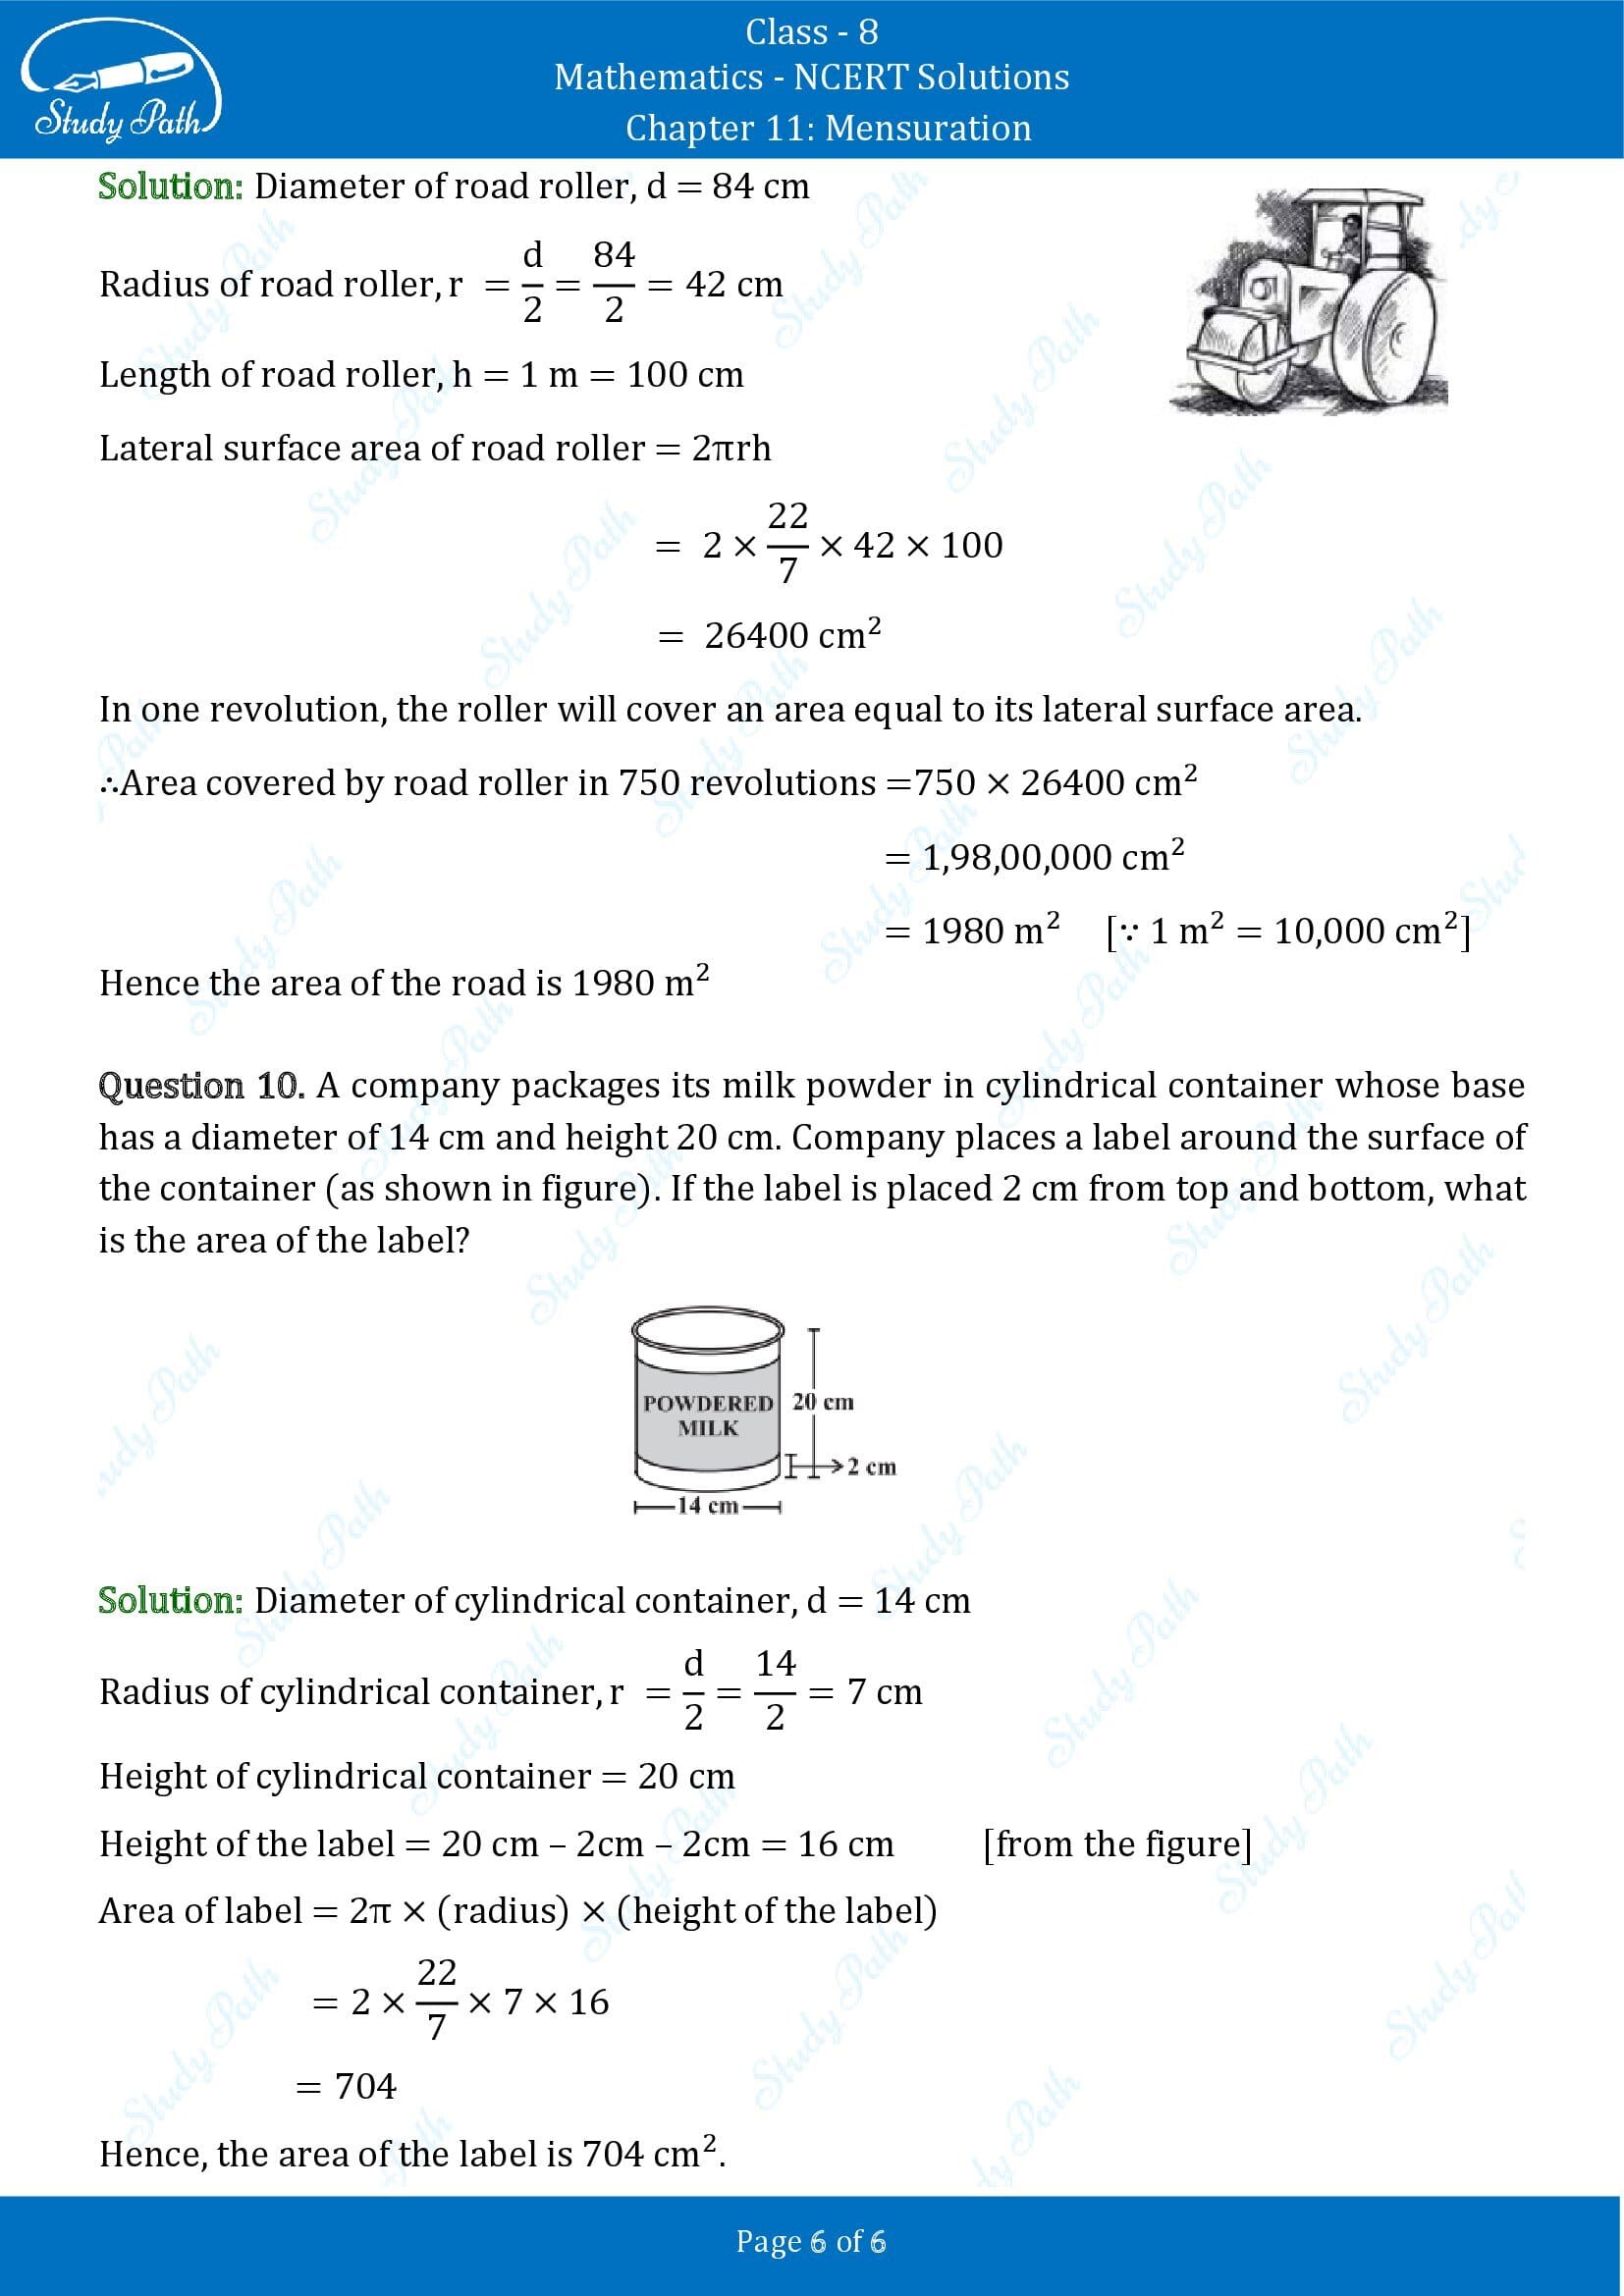 NCERT Solutions for Class 8 Maths Chapter 11 Mensuration Exercise 11.3 00006